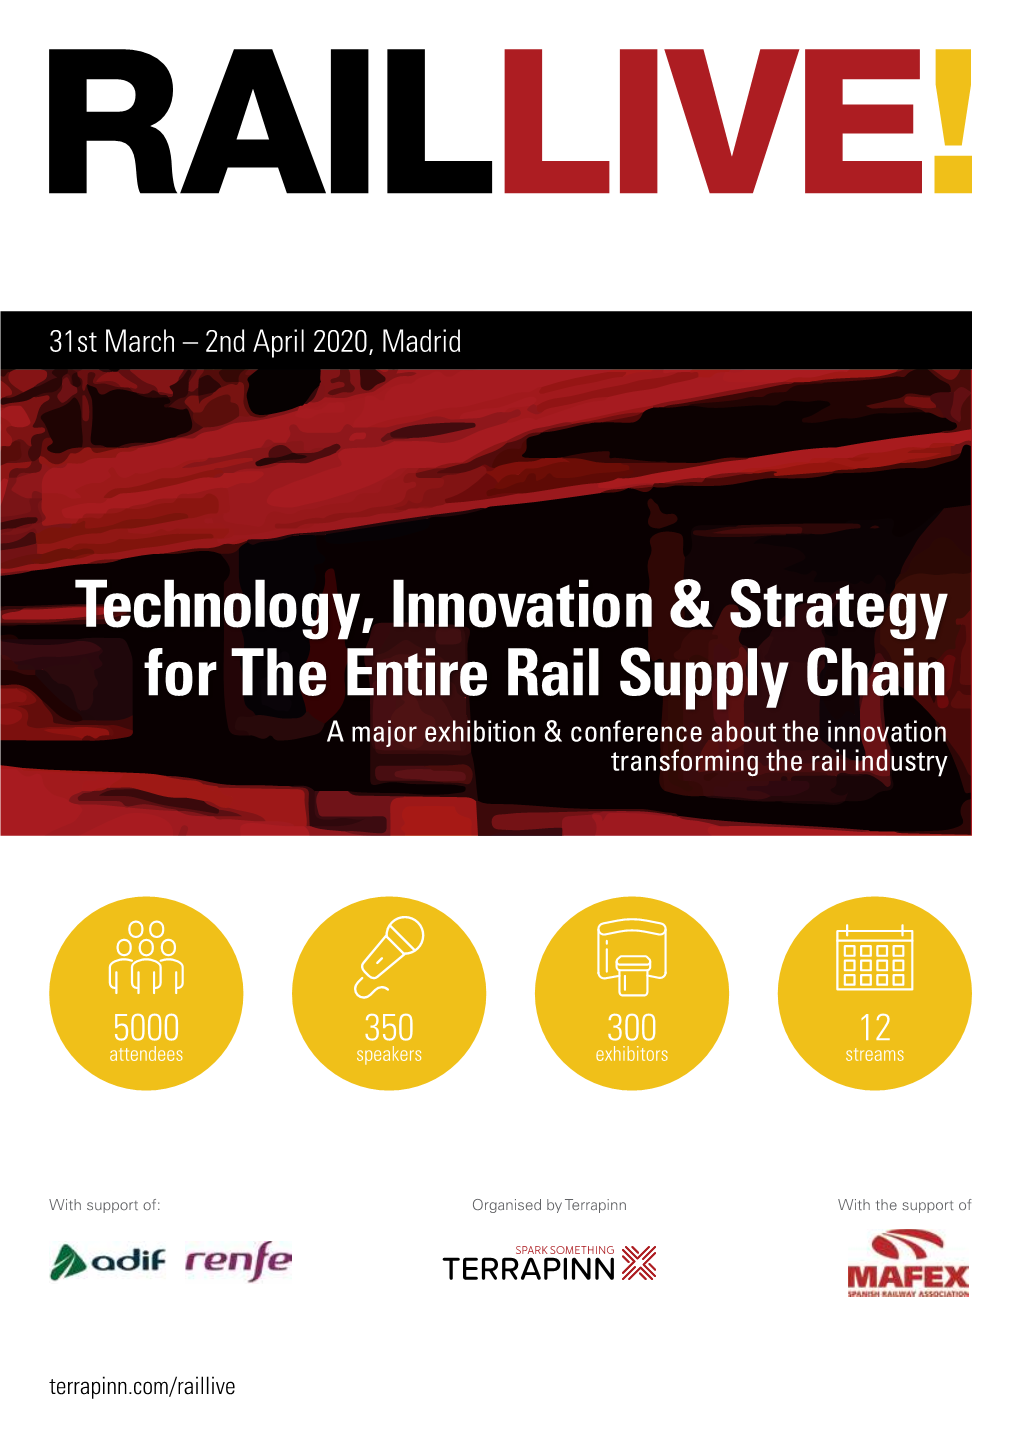 Technology, Innovation & Strategy for the Entire Rail Supply Chain